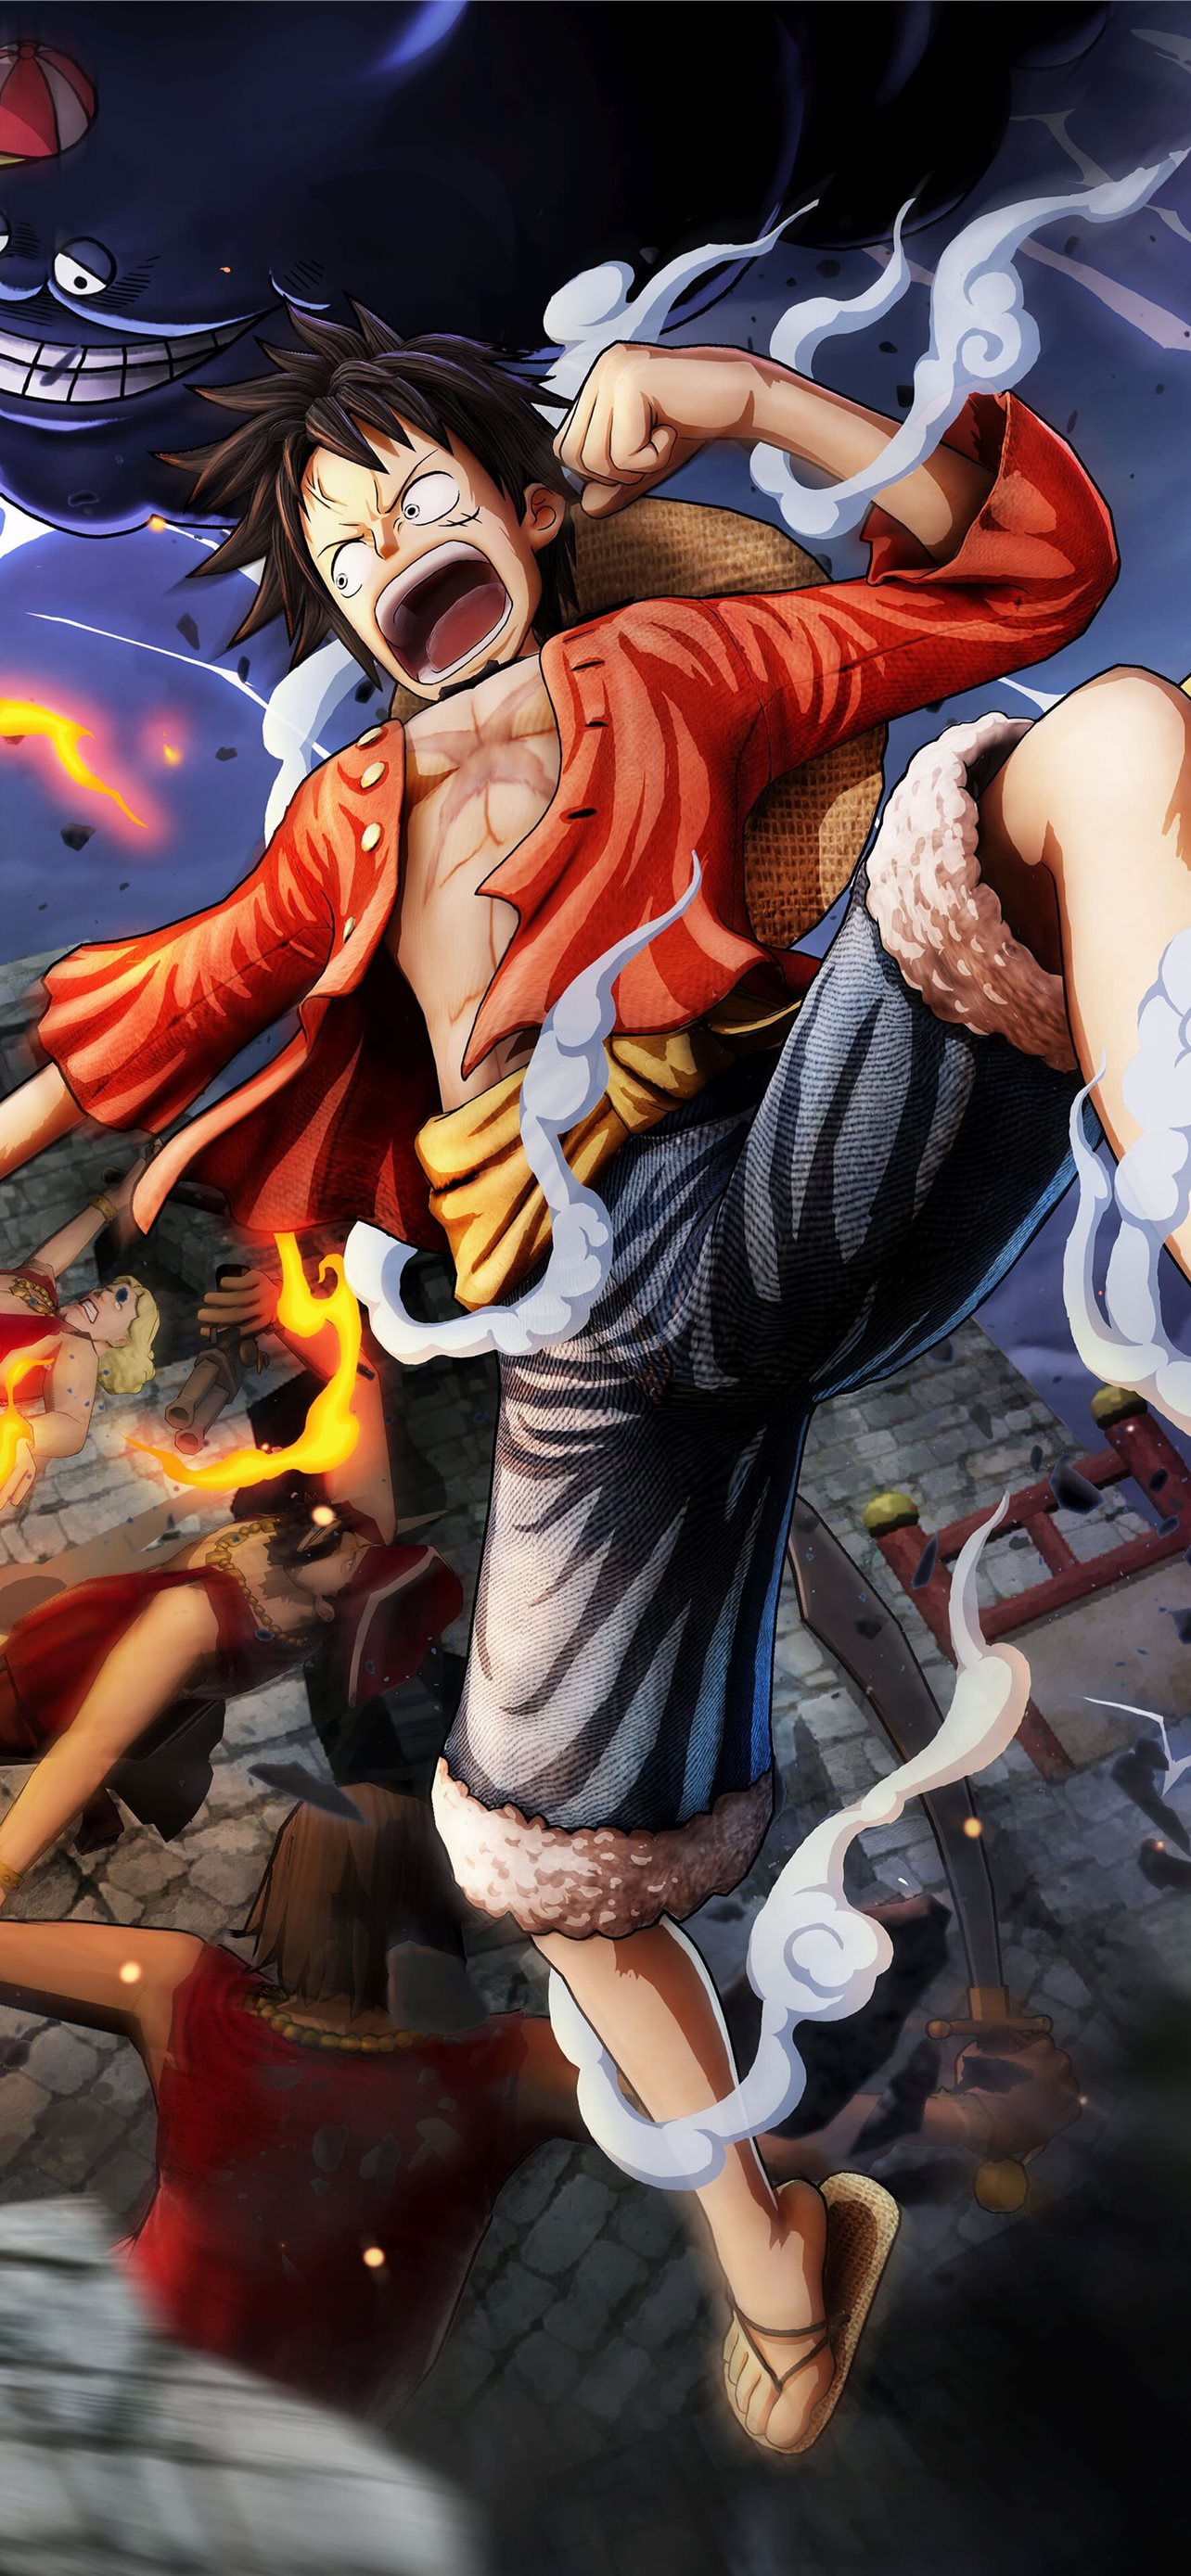 Anime One Piece KoLPaPer Awesome Free HD iPhone Wallpapers Free